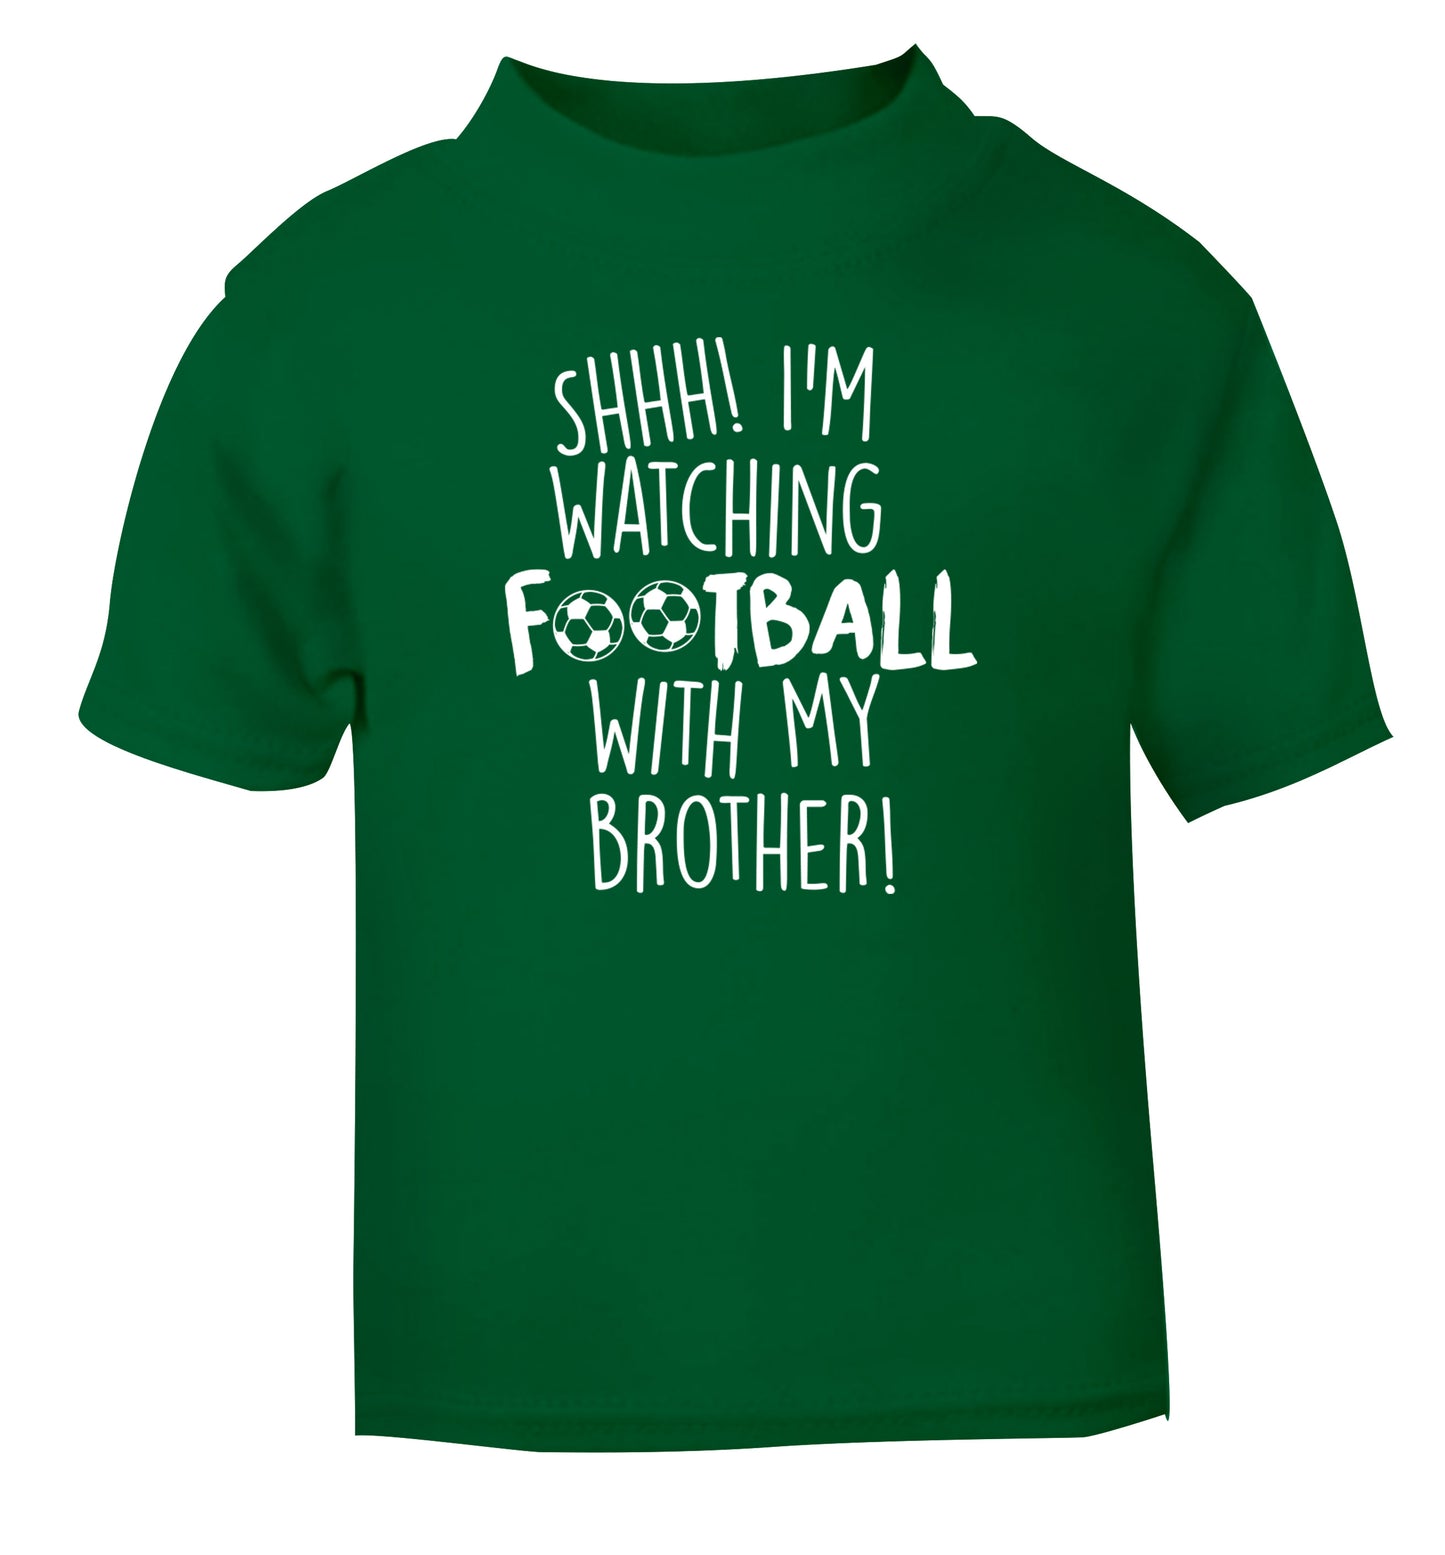 Shhh I'm watching football with my brother green Baby Toddler Tshirt 2 Years